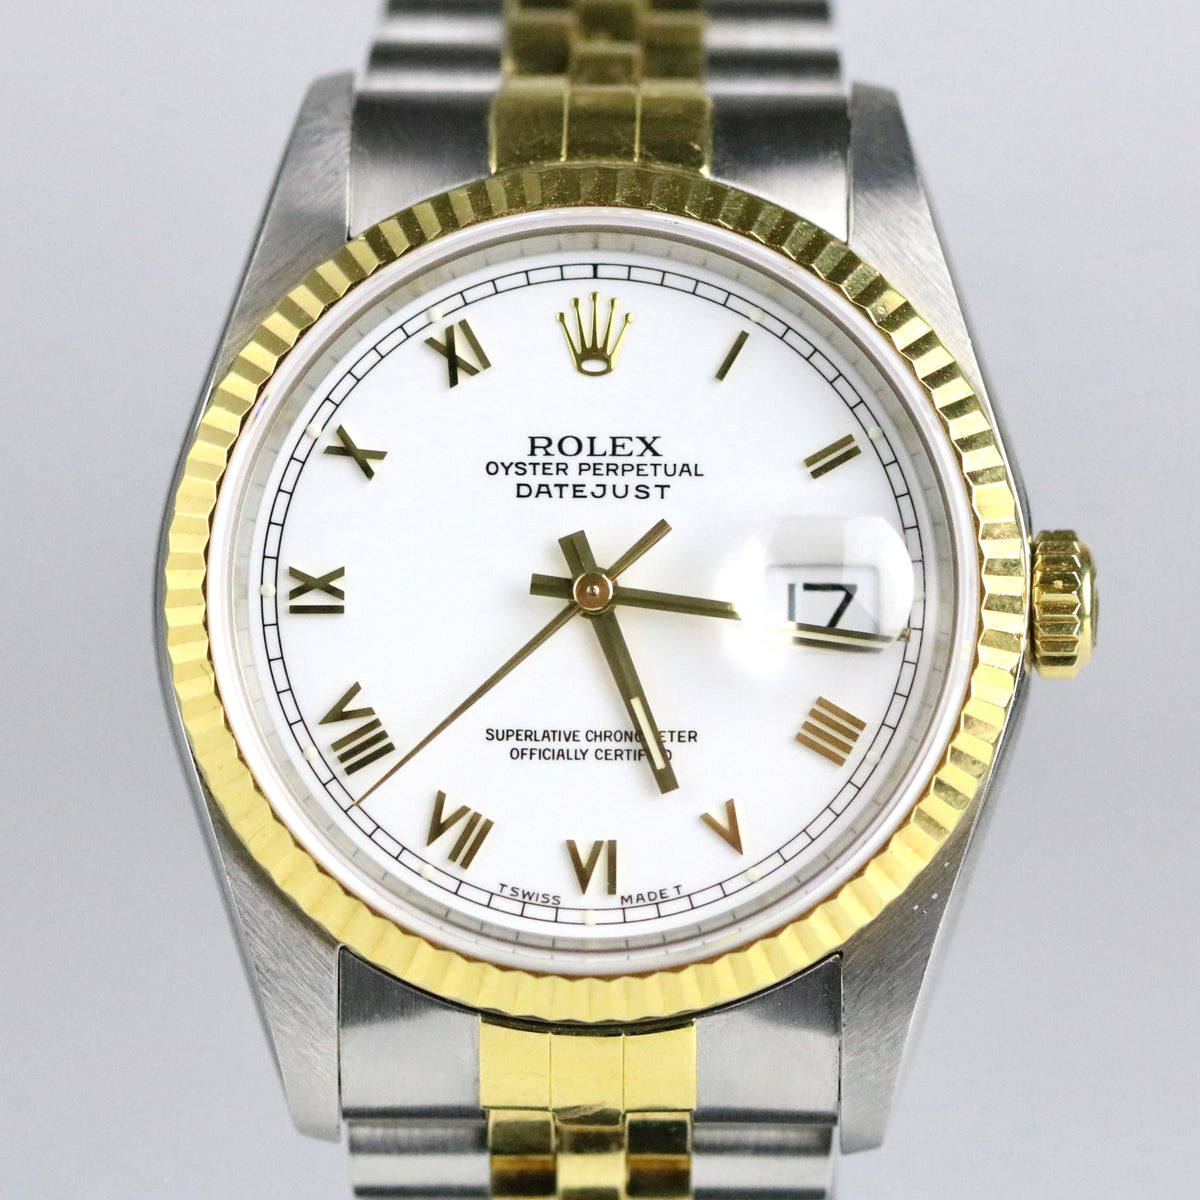 1987 Rolex 16233 Datejust 36mm White Roman Dial with Box & Papers